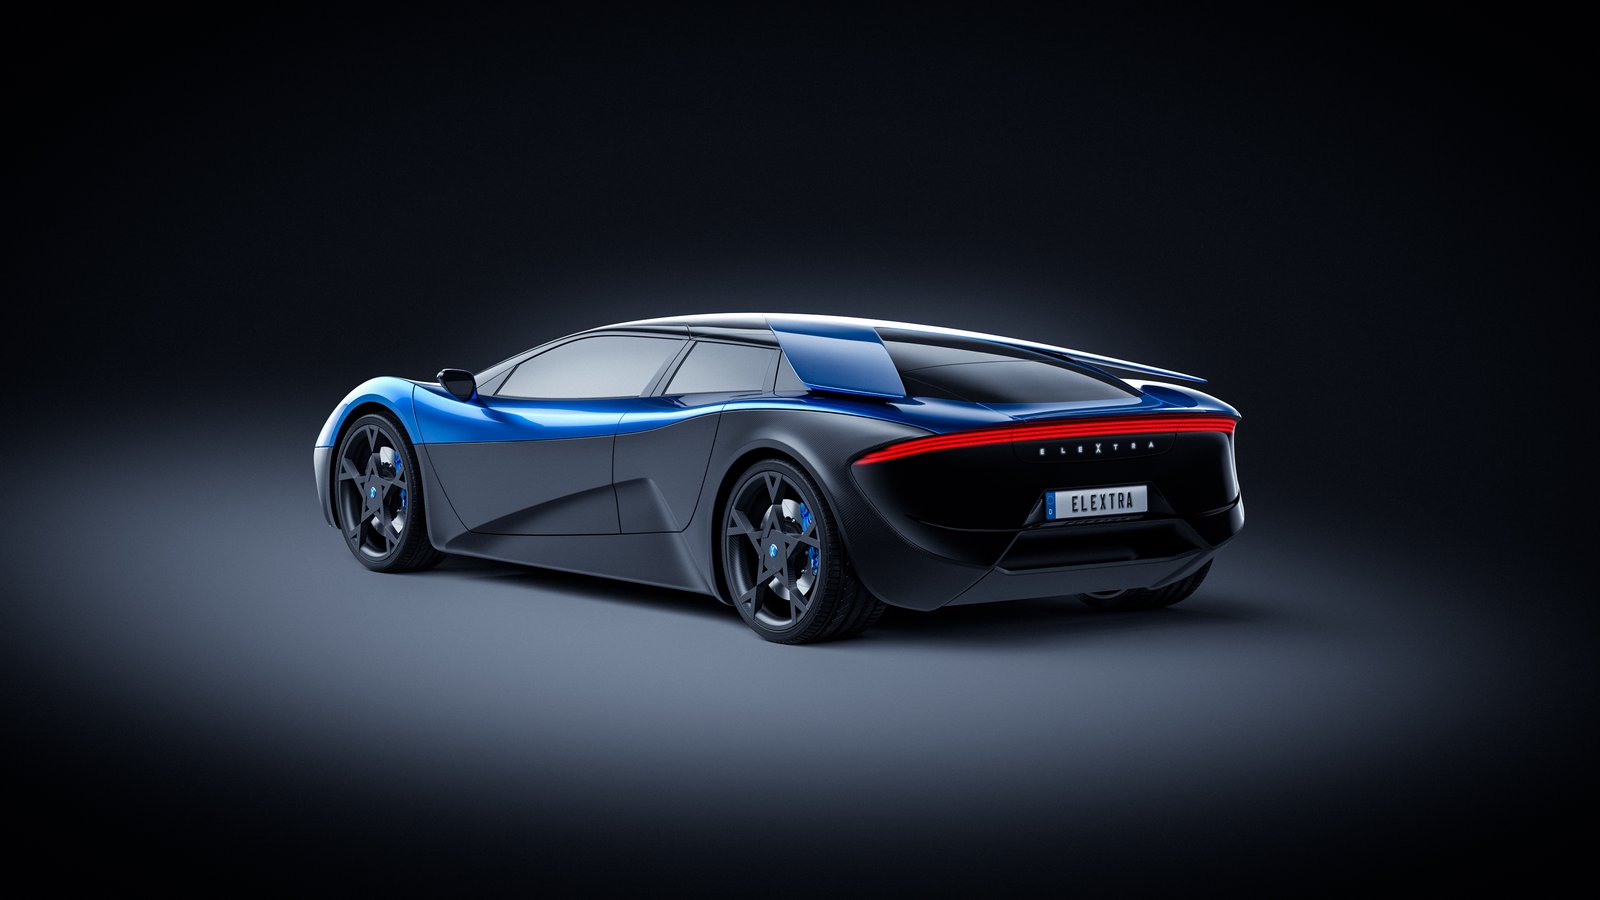 Elextra's Electric Supercar Slated To Launch In 2019 With 670 HP | Carscoops1600 x 900